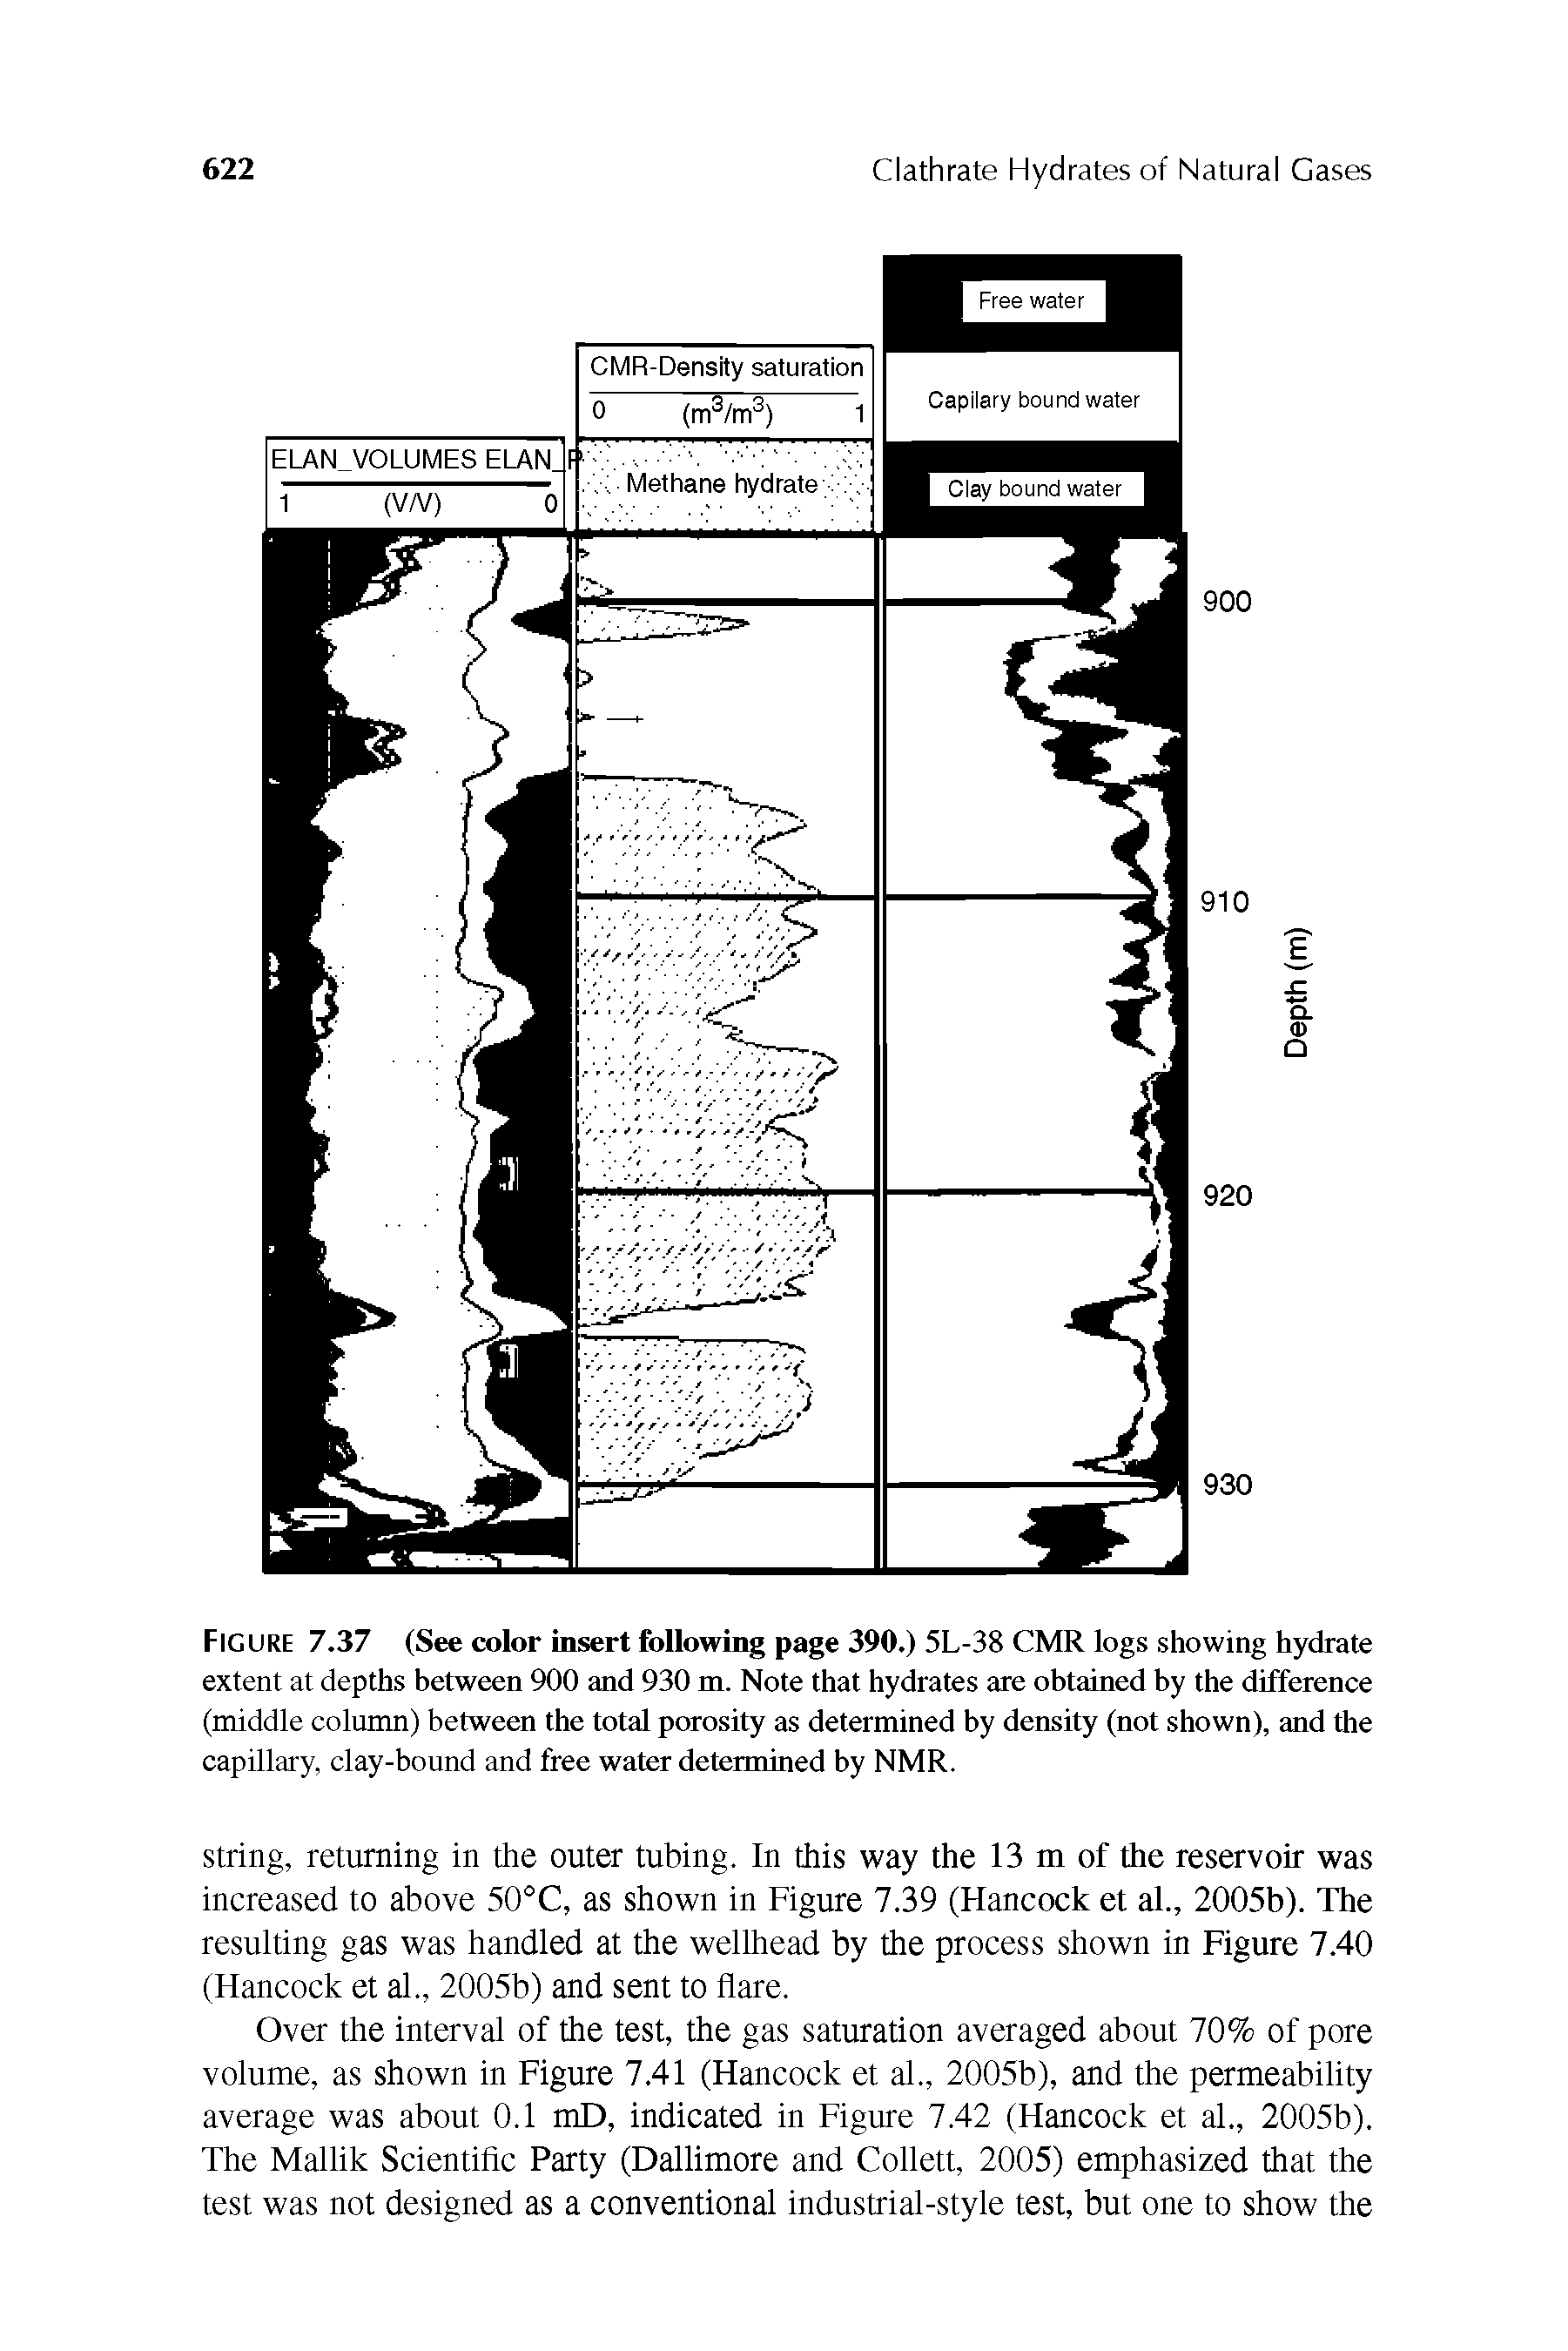 Figure 7.37 (See color insert following page 390.) 5L-38 CMR logs showing hydrate extent at depths between 900 and 930 m. Note that hydrates are obtained by the difference (middle column) between the total porosity as determined by density (not shown), and the capillary, clay-bound and free water determined by NMR.